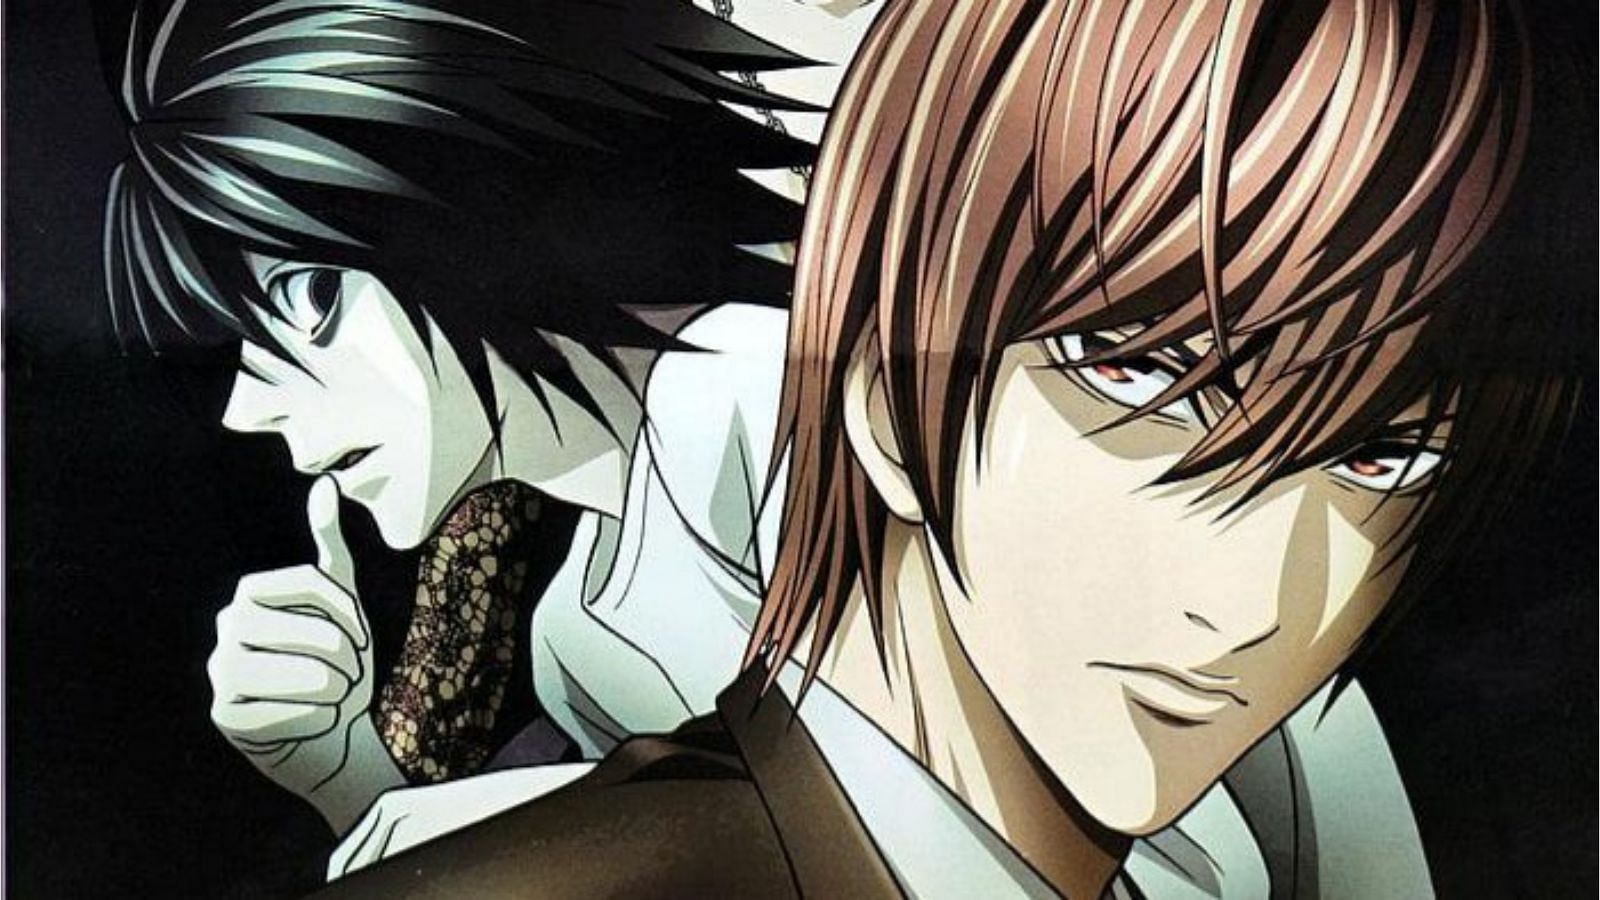 L and Light Yagami from Death Note (Image via Madhouse)